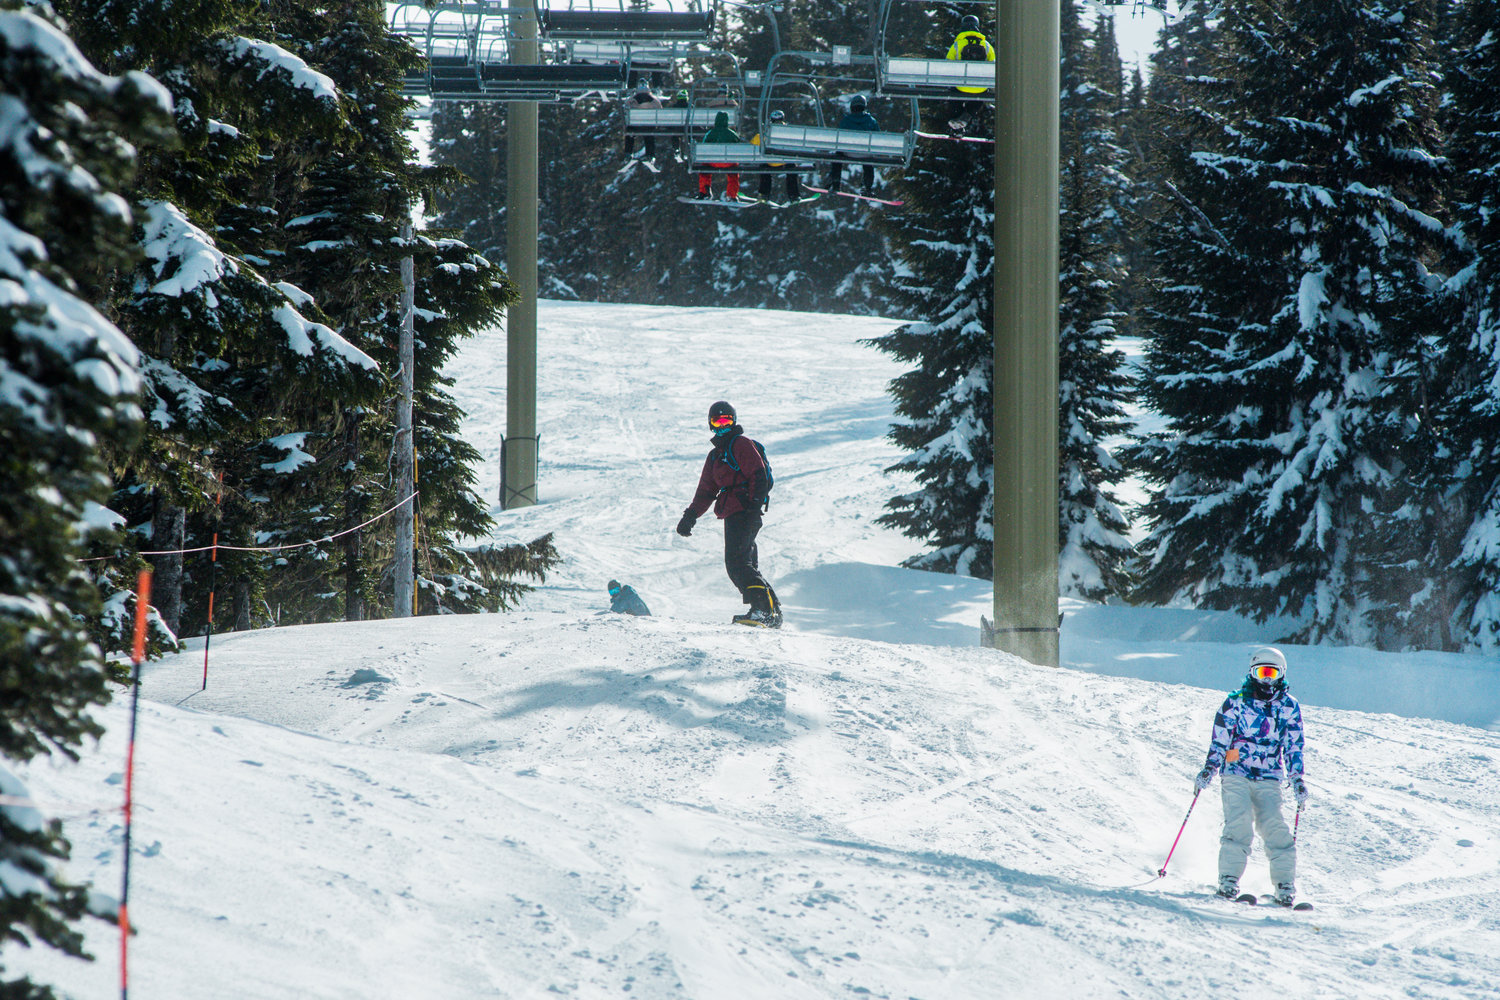 Skiers and snowboarders make their way down the mountain at White Pass Ski Area on Sunday.